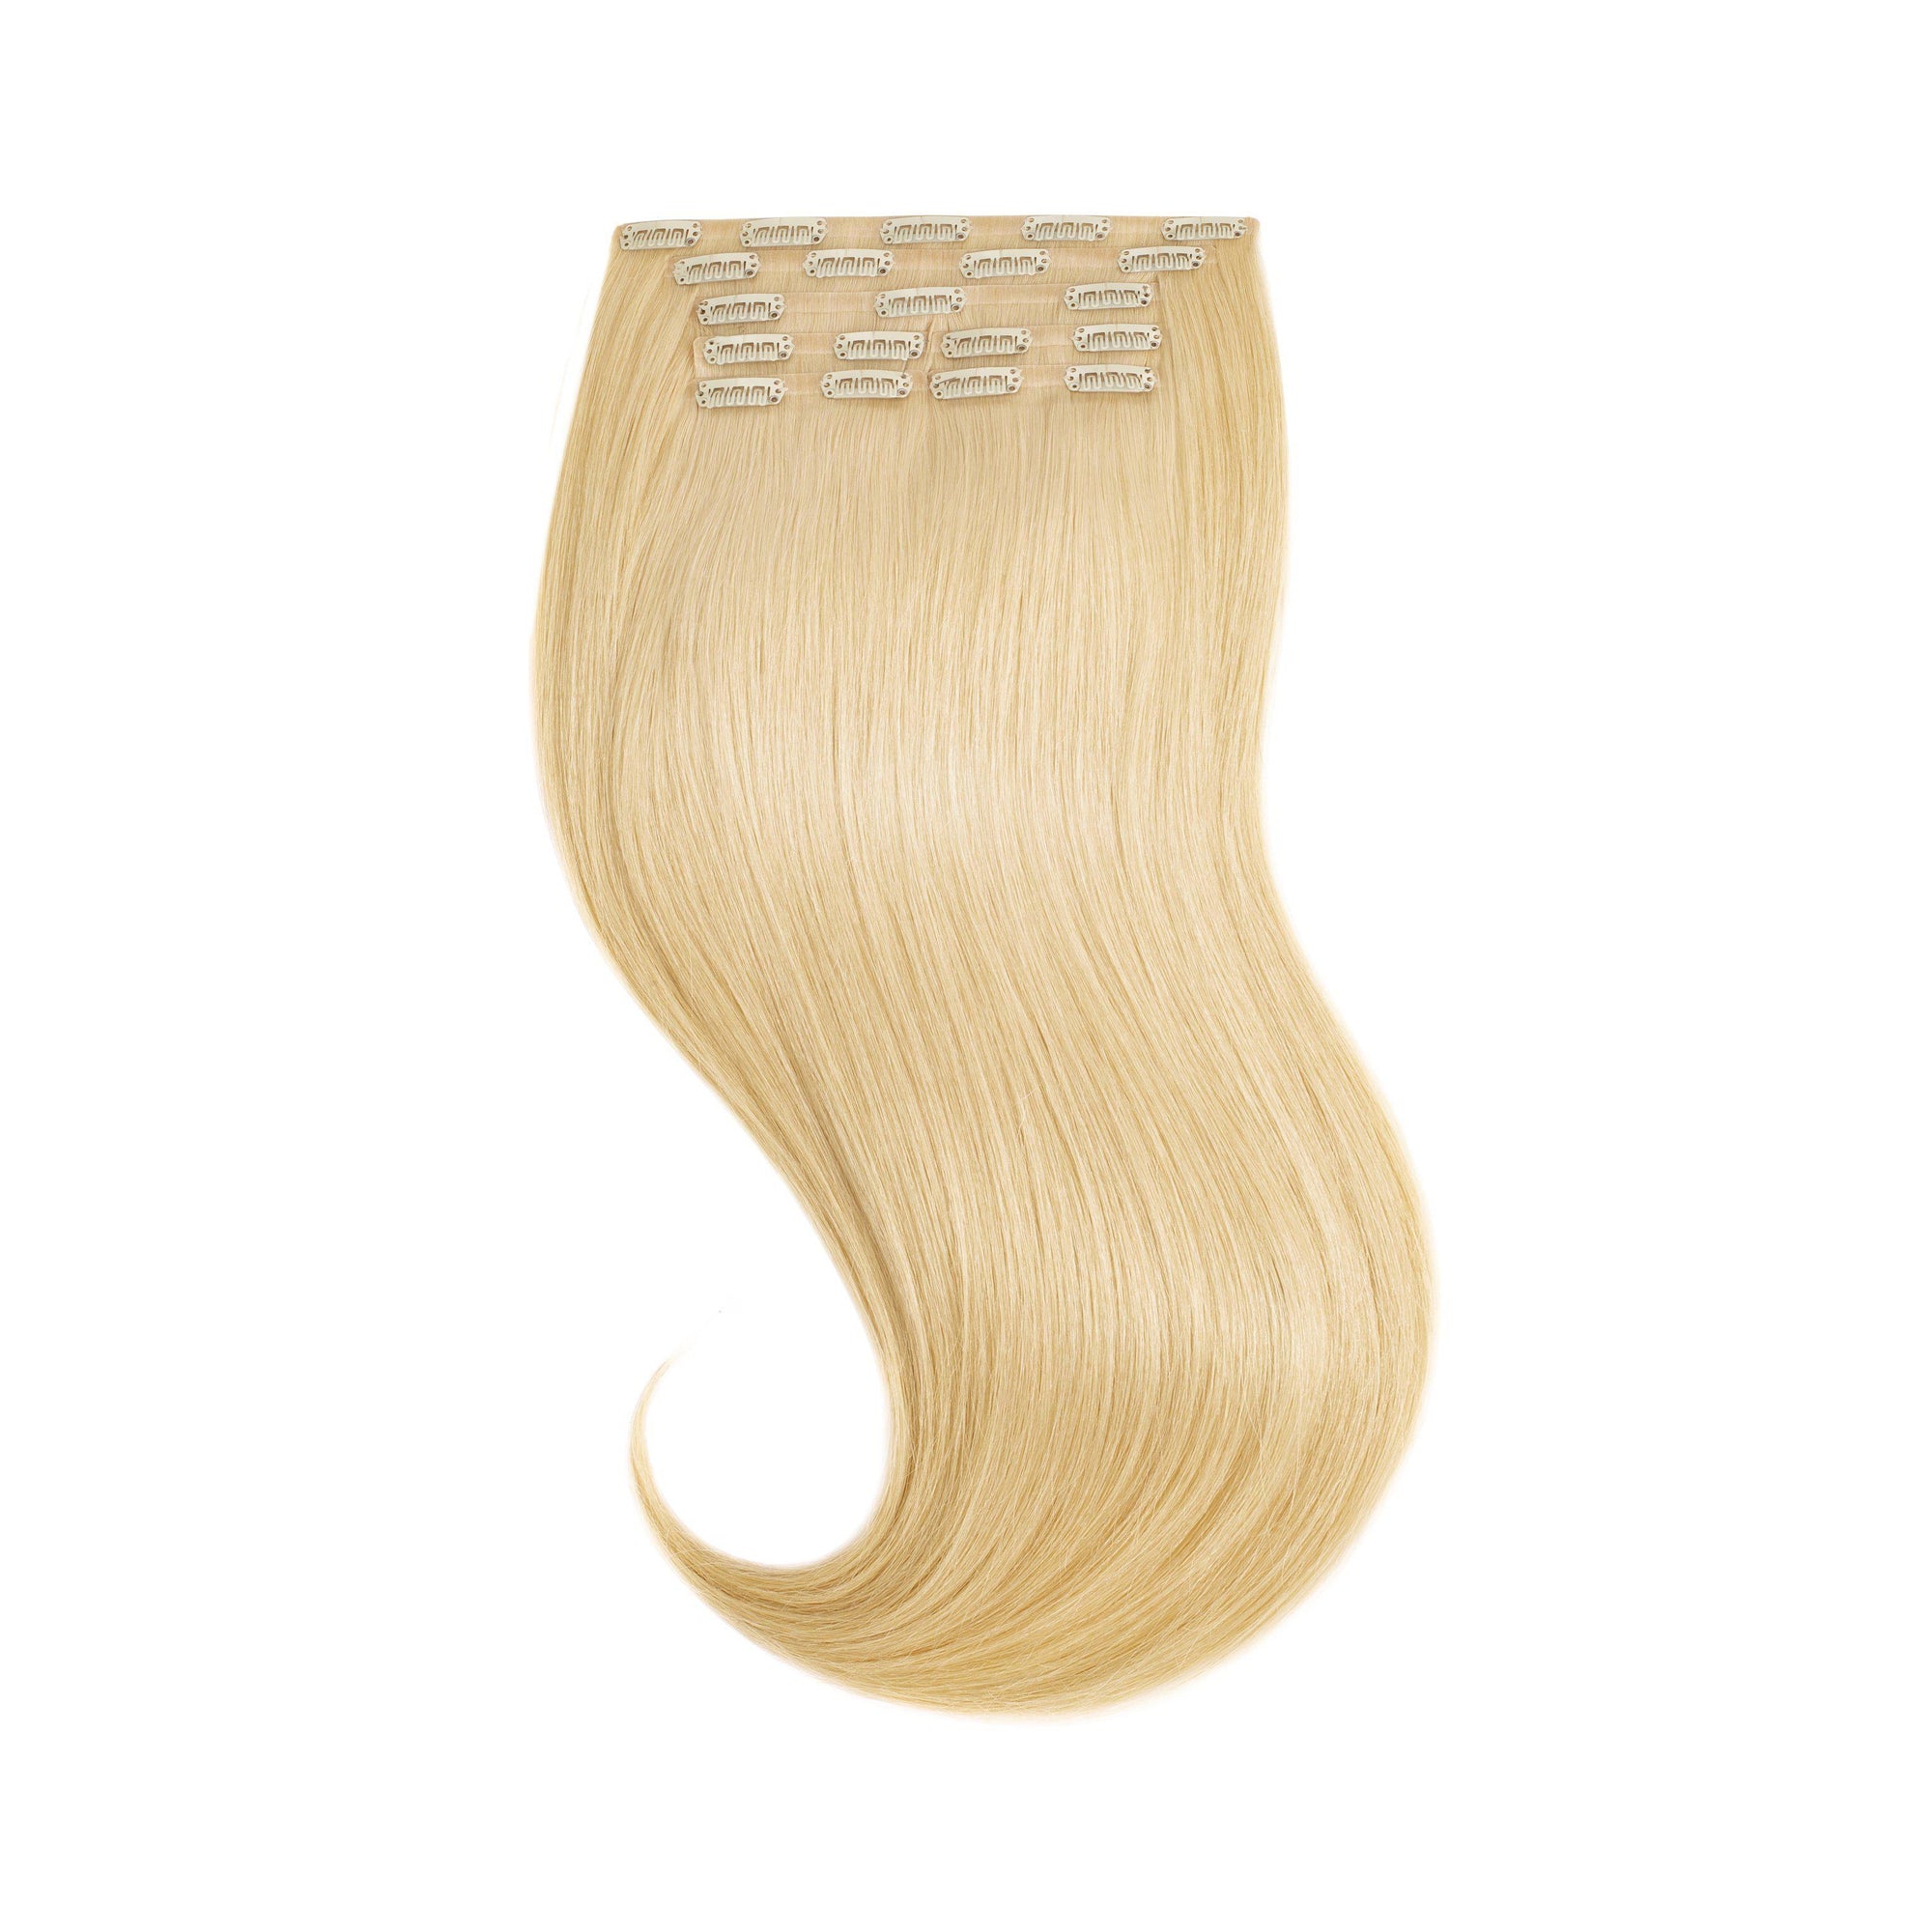 Hair Weft 24 Rooted Golden Balayage 4/18/24 - Glam Seamless Hair Extensions